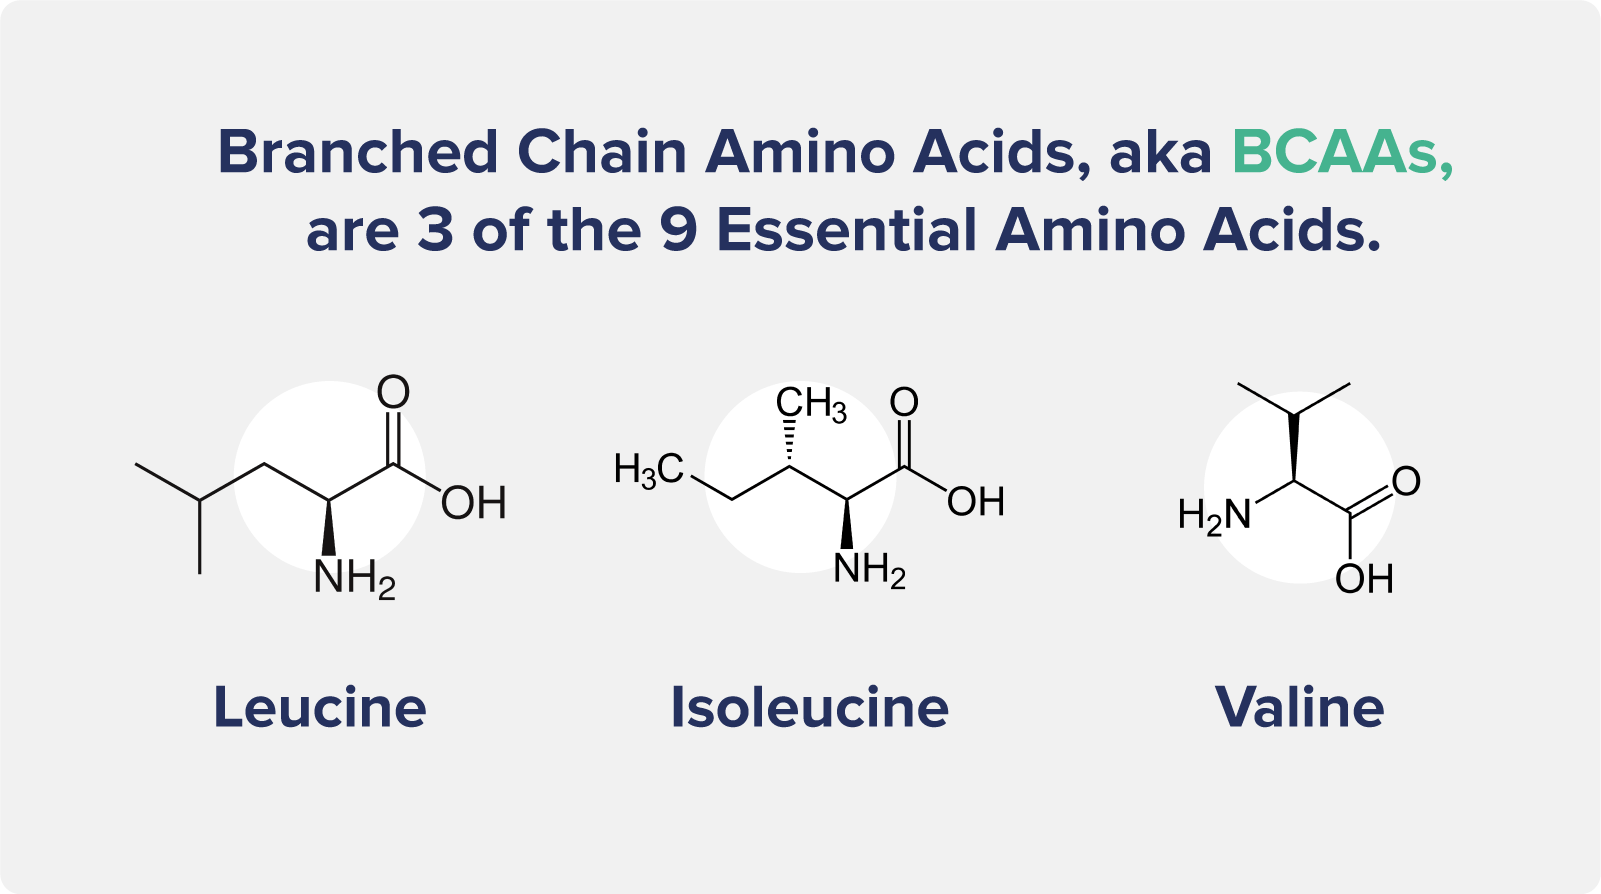 Branched Chain Amino Acids, aka BCAAs, are 3 of the 9 Essential Amino Acids.